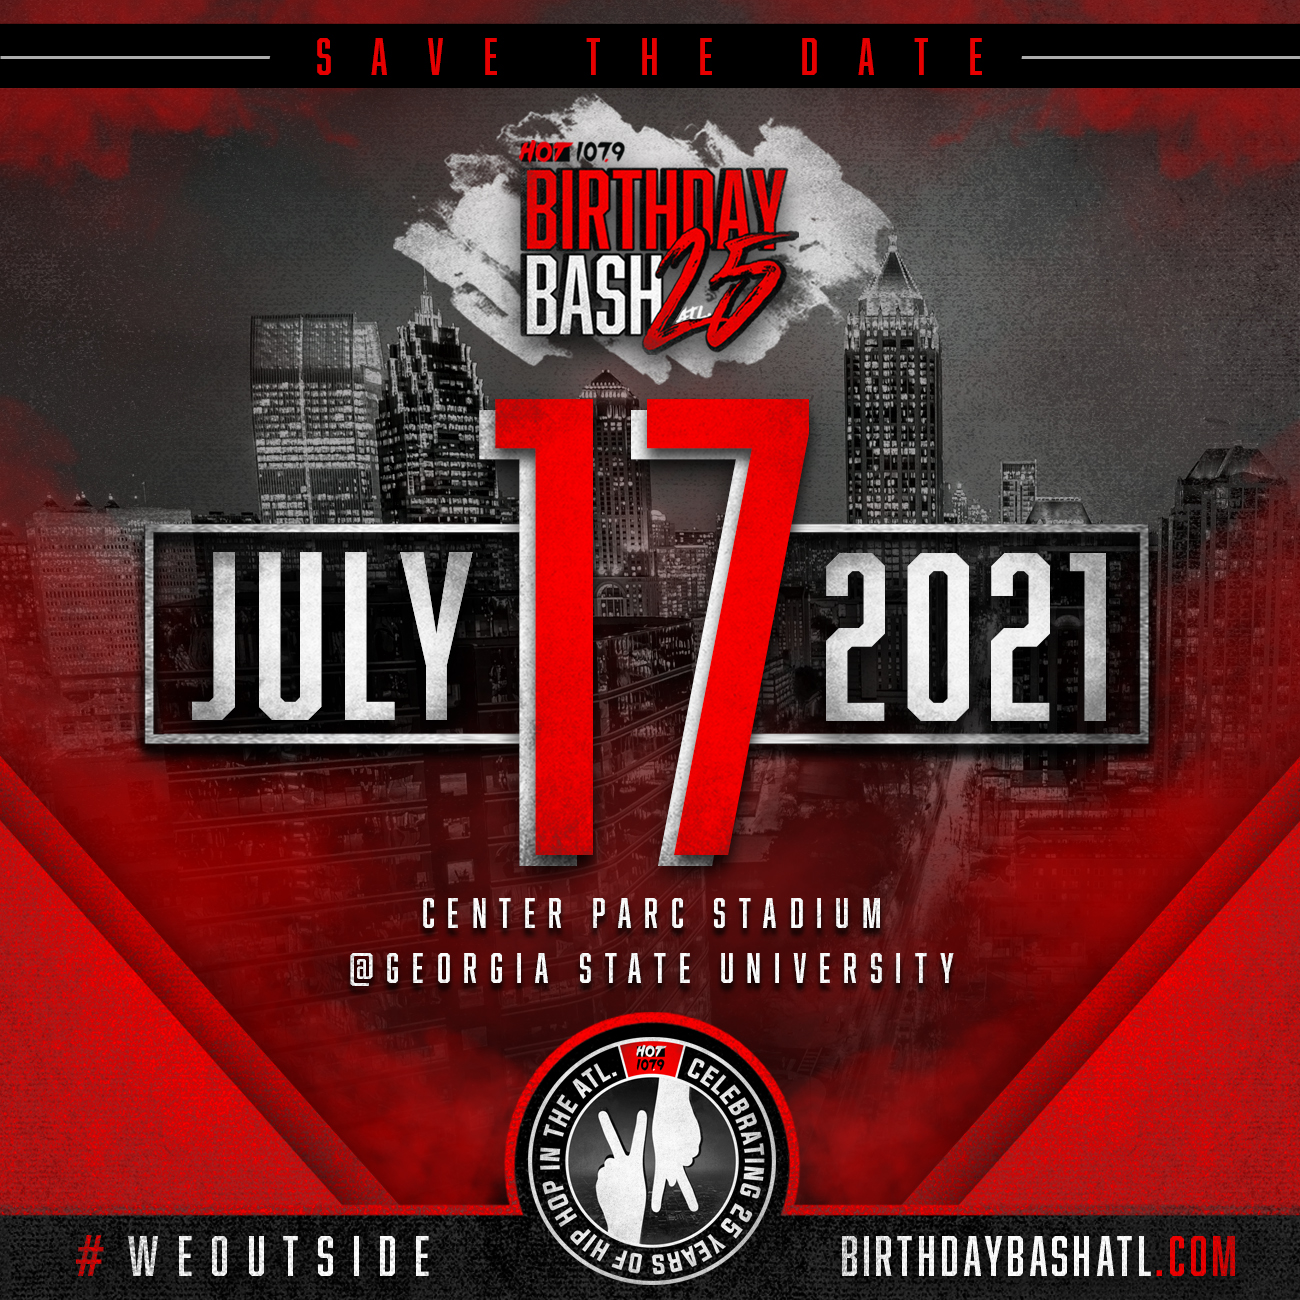 SAVE THE DATE Birthday Bash 25 at Center Parc Stadium July 17th